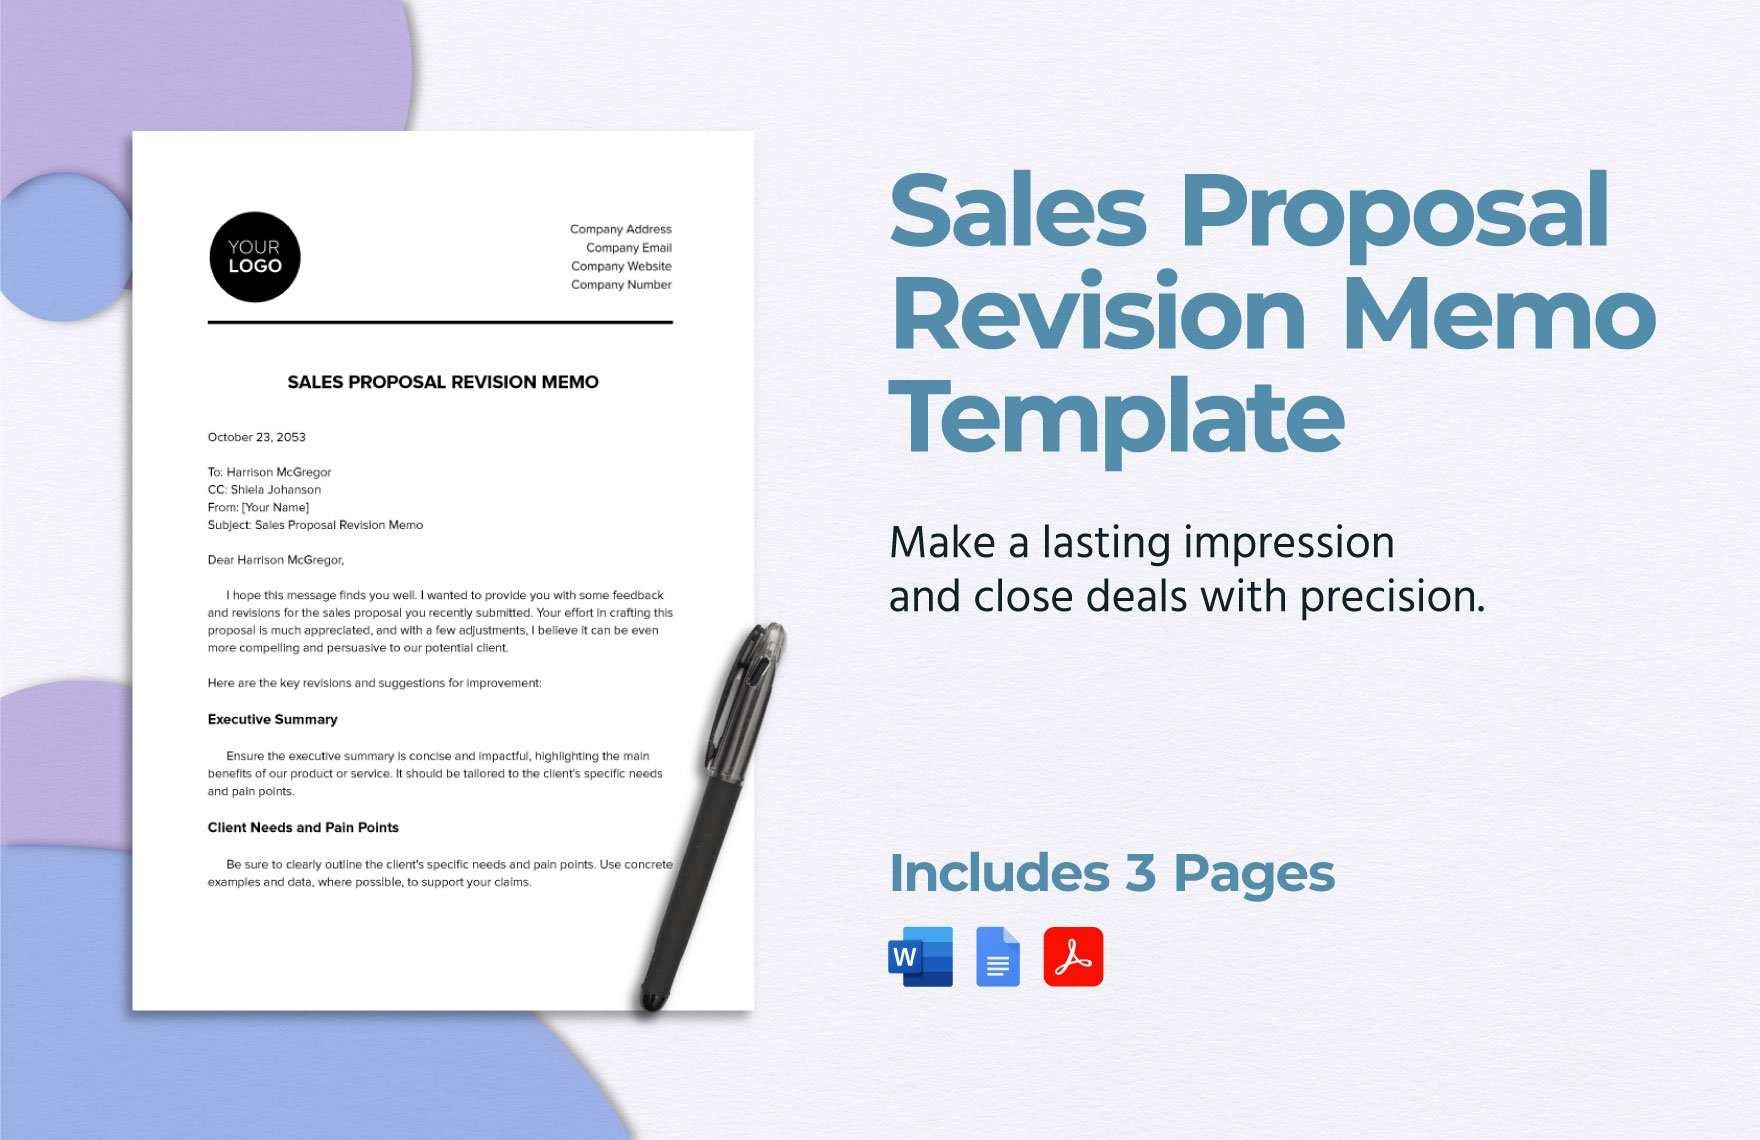 Sales Proposal Revision Memo Template in Word, Google Docs, PDF